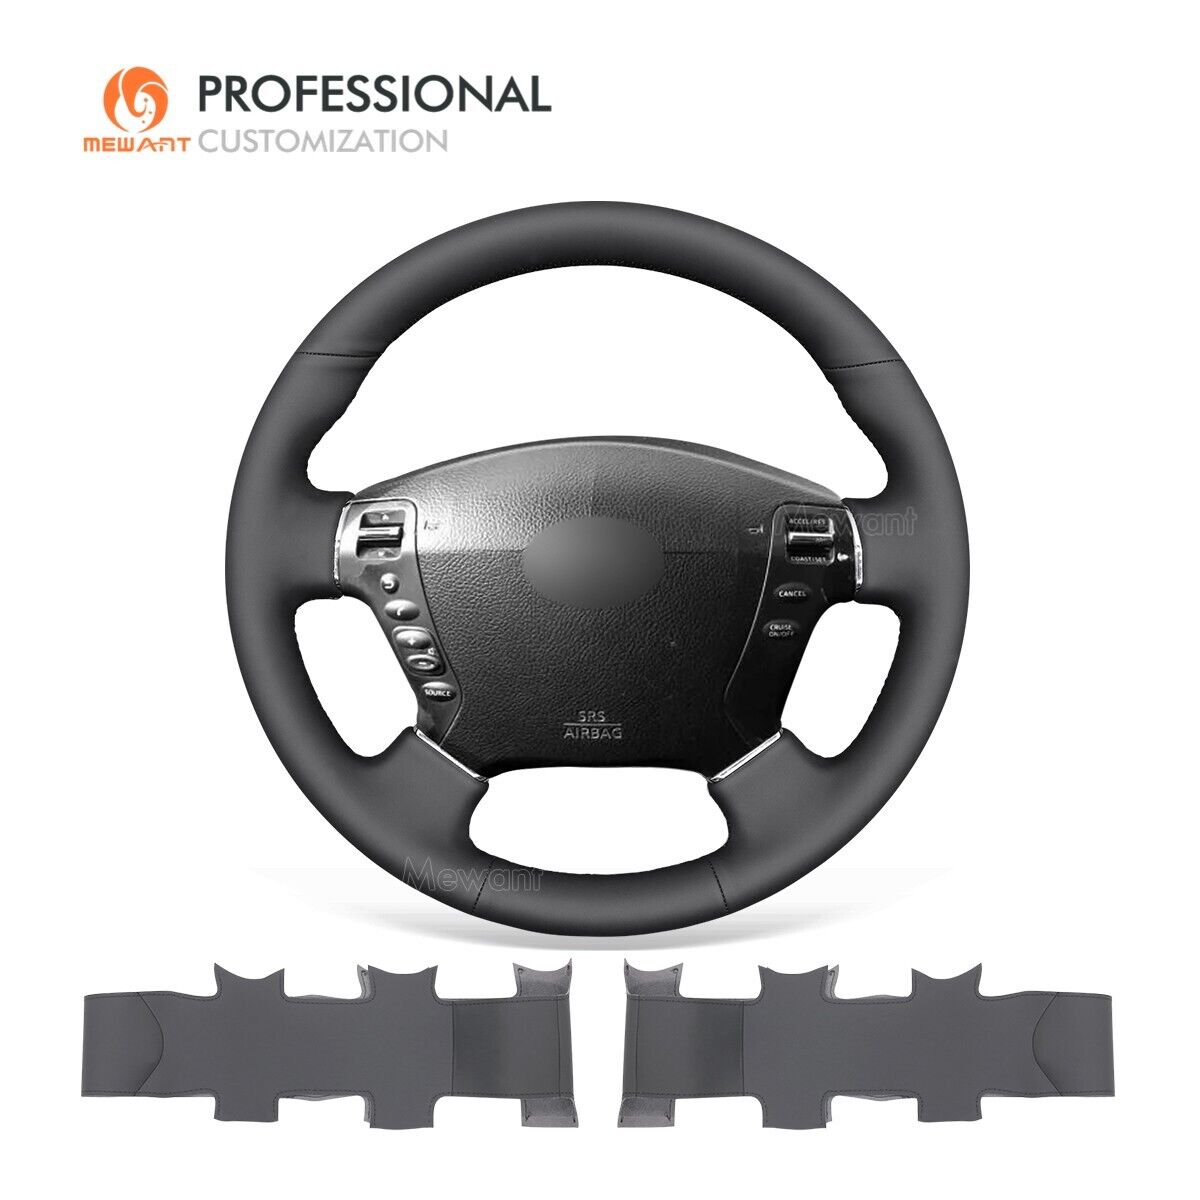 MEWANT DIY Real Leather Steering Wheel Cover for Nissan Fuga Cima Infiniti M35